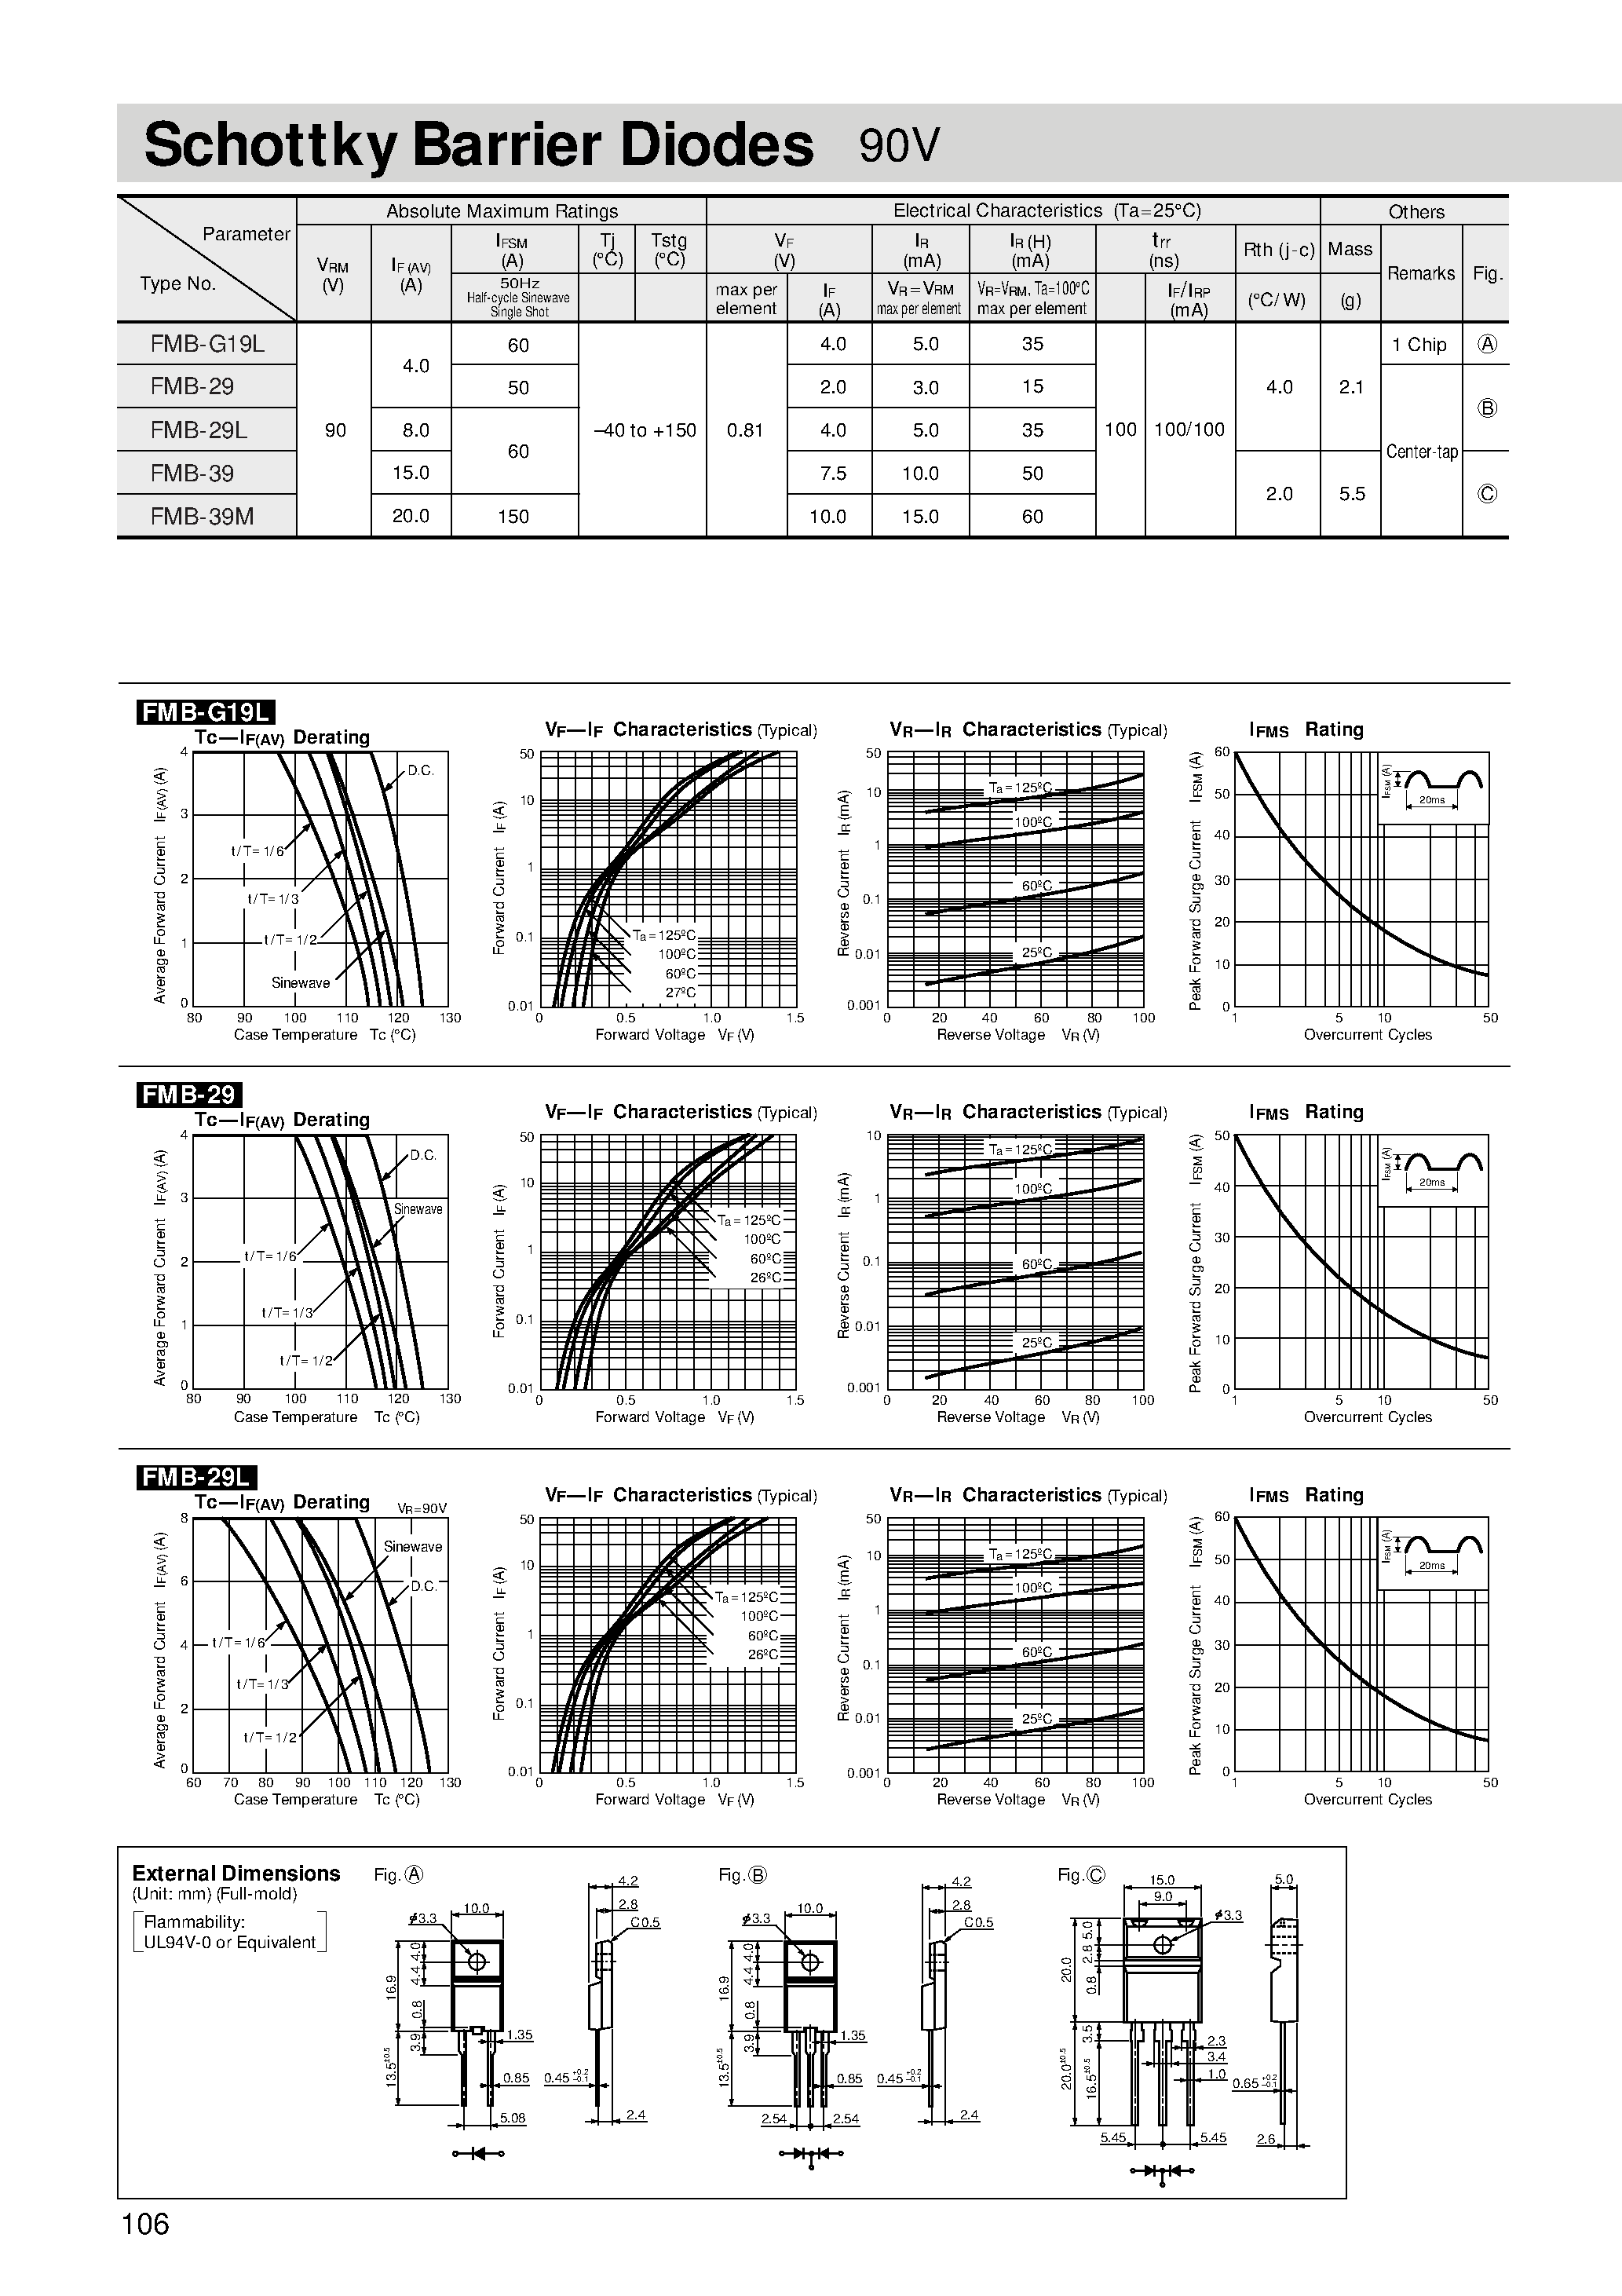 Datasheet FMB-29 - Schottky Barrier Diodes 90V page 1